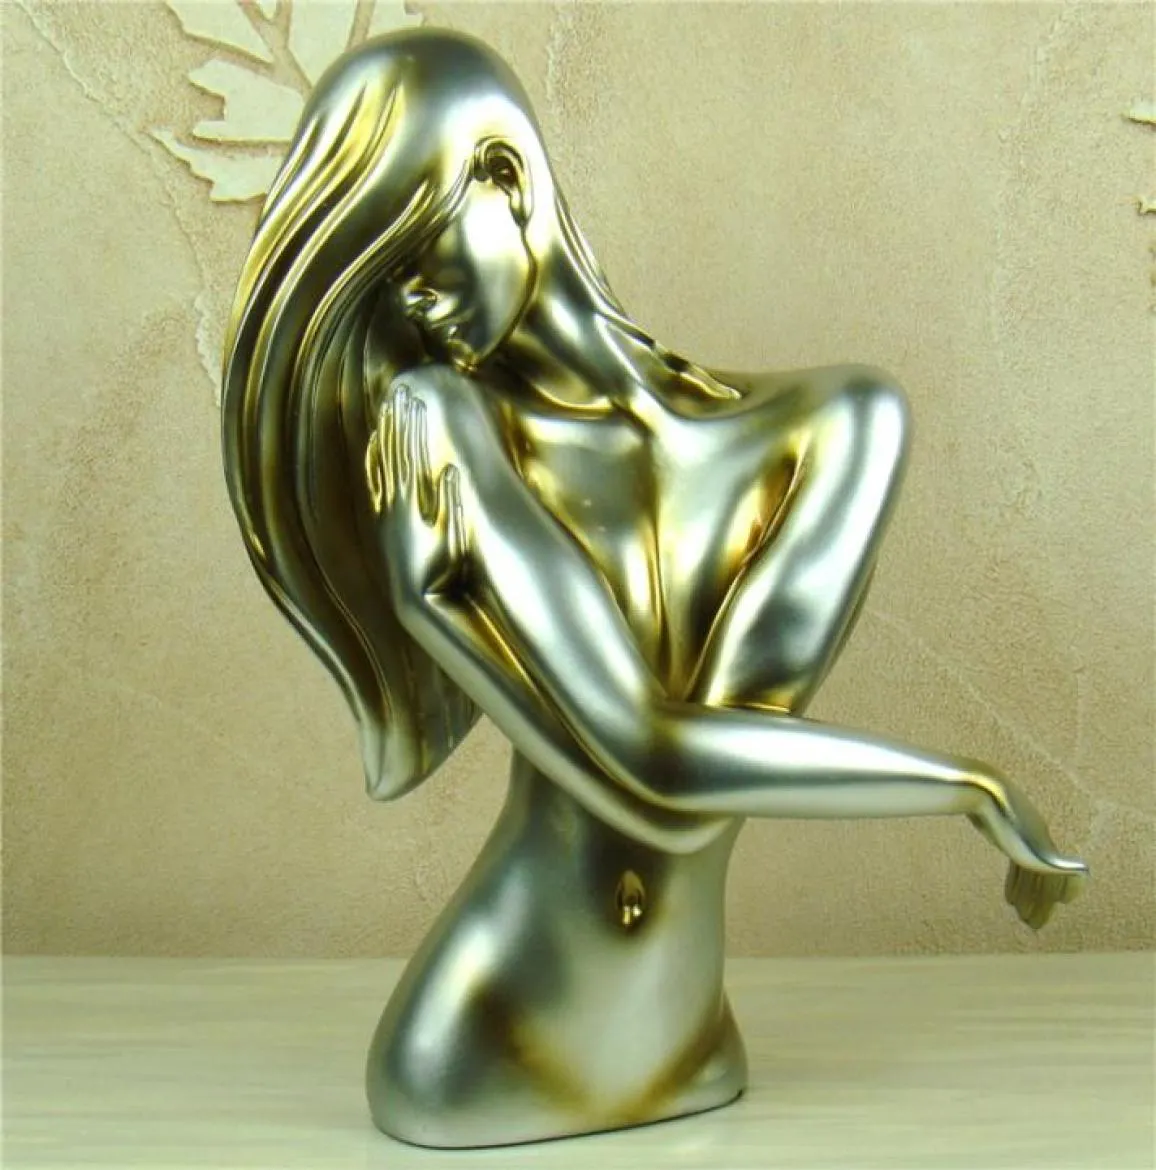 Abstract Naked Woman Bust Handmade Resin Belle Sculpture Human Body Art Ornament Lover039s Gift Craft for Parlor Decor Furnishi9060327